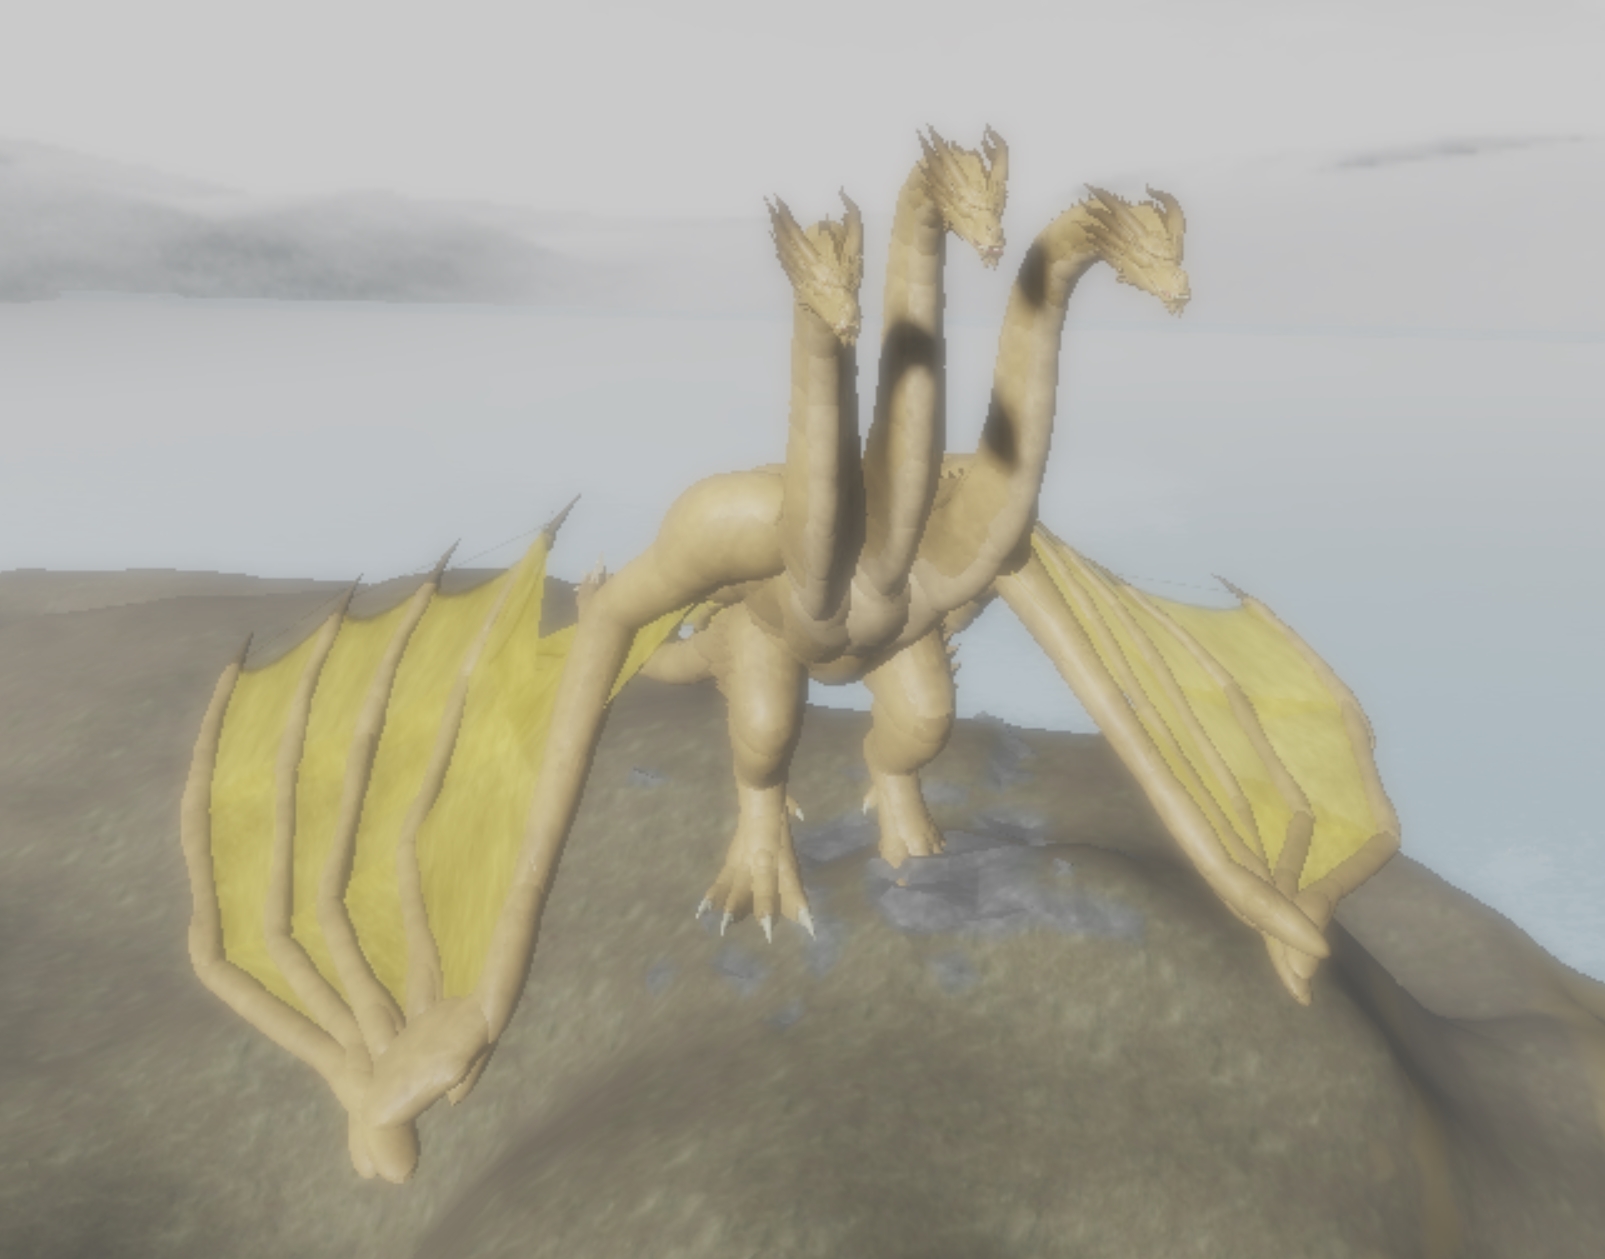 How to get the Creator Challenge Quiz Prizes! Ghidorah's Wings